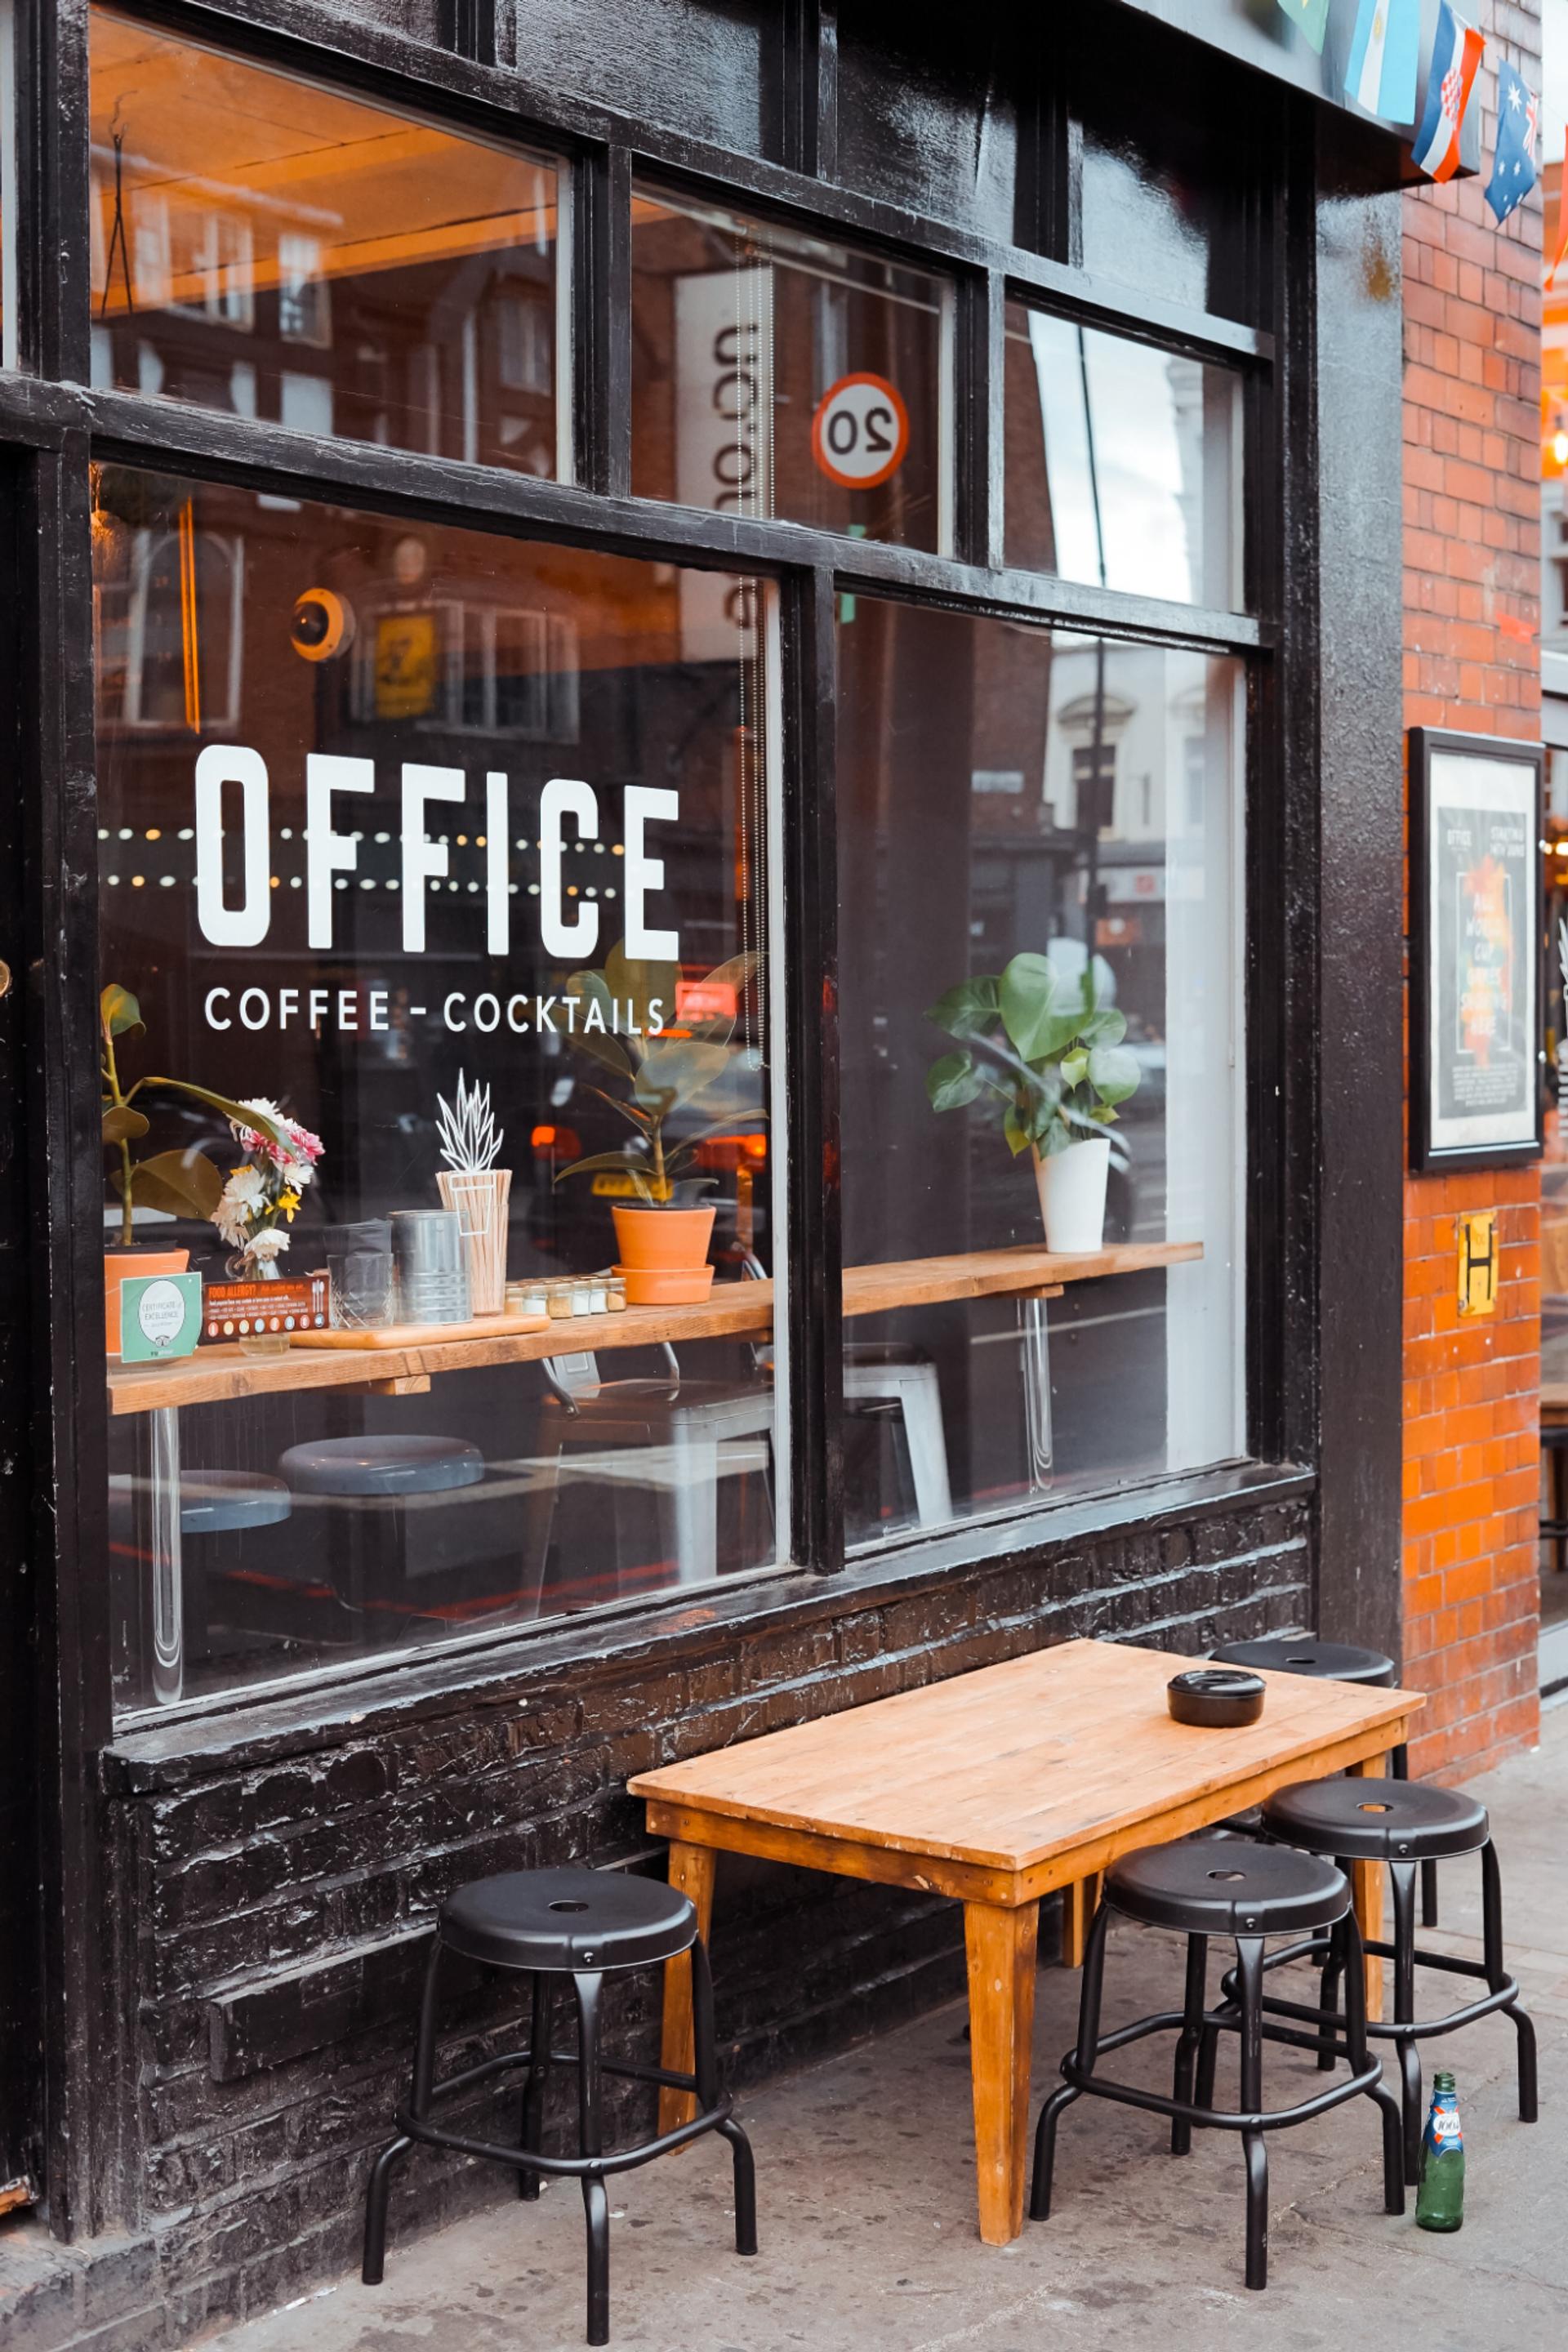 The office coffee name attracts a very specific set of customers - those looking to have a drink after work. This desserts business name is perfect for a coffee shop near the city business center